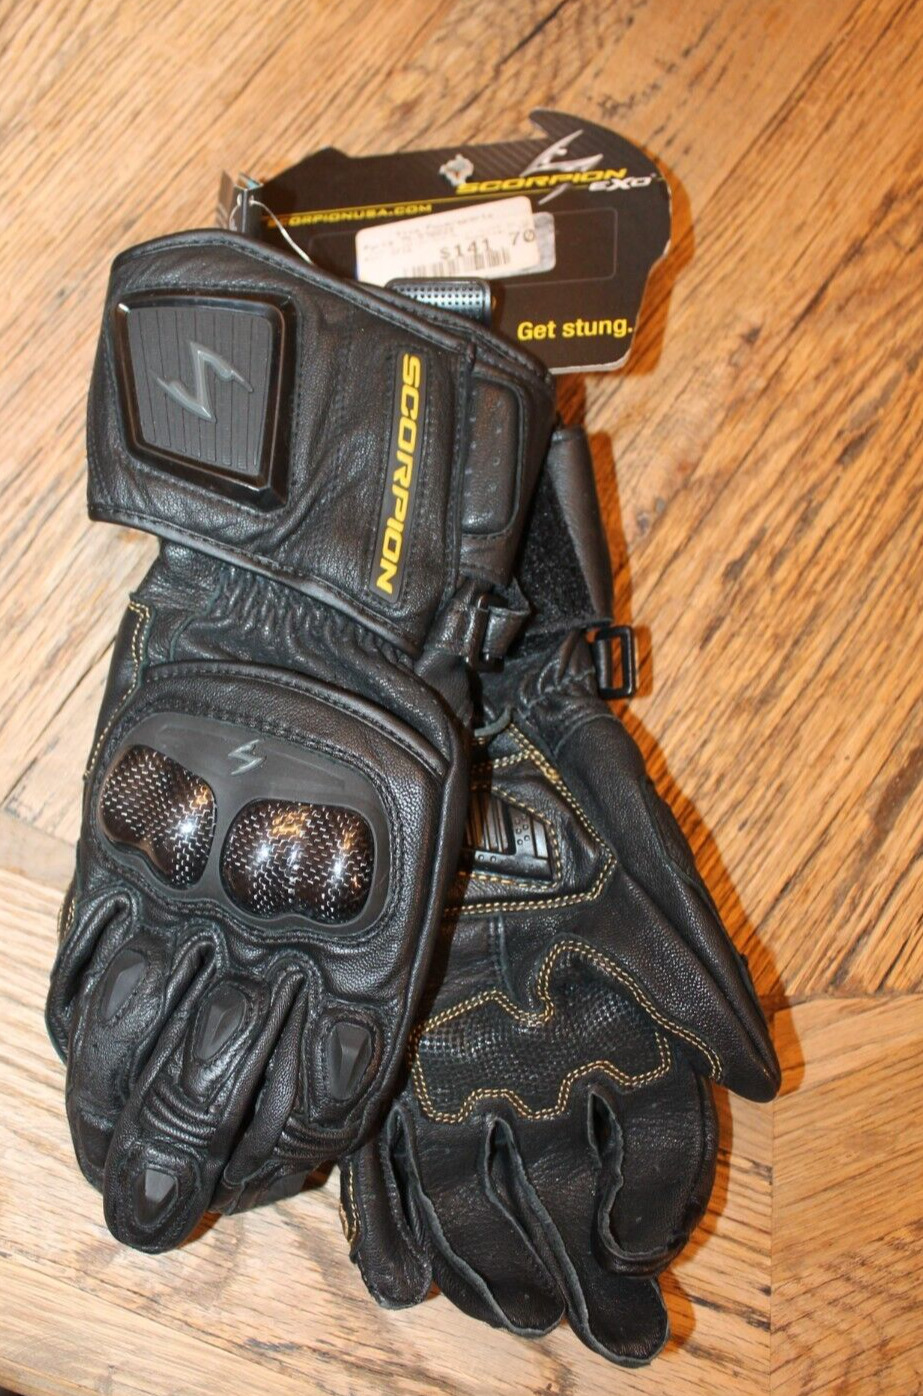 SCORPION g29-037 MENS SG3 MKII LEATHER GLOVES Size 2XL 75-57002x